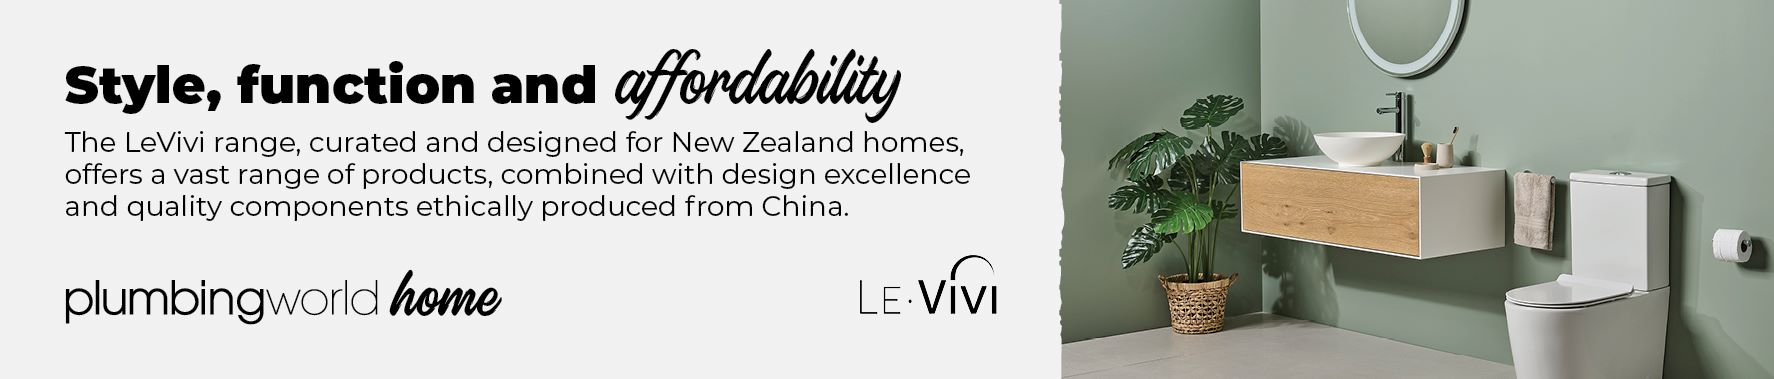 Style, function and affordability - The LeVivi range, curated and designed for New Zealand homes, offers a vast range of products, combined with design excellence and quality components ethically produced from China.